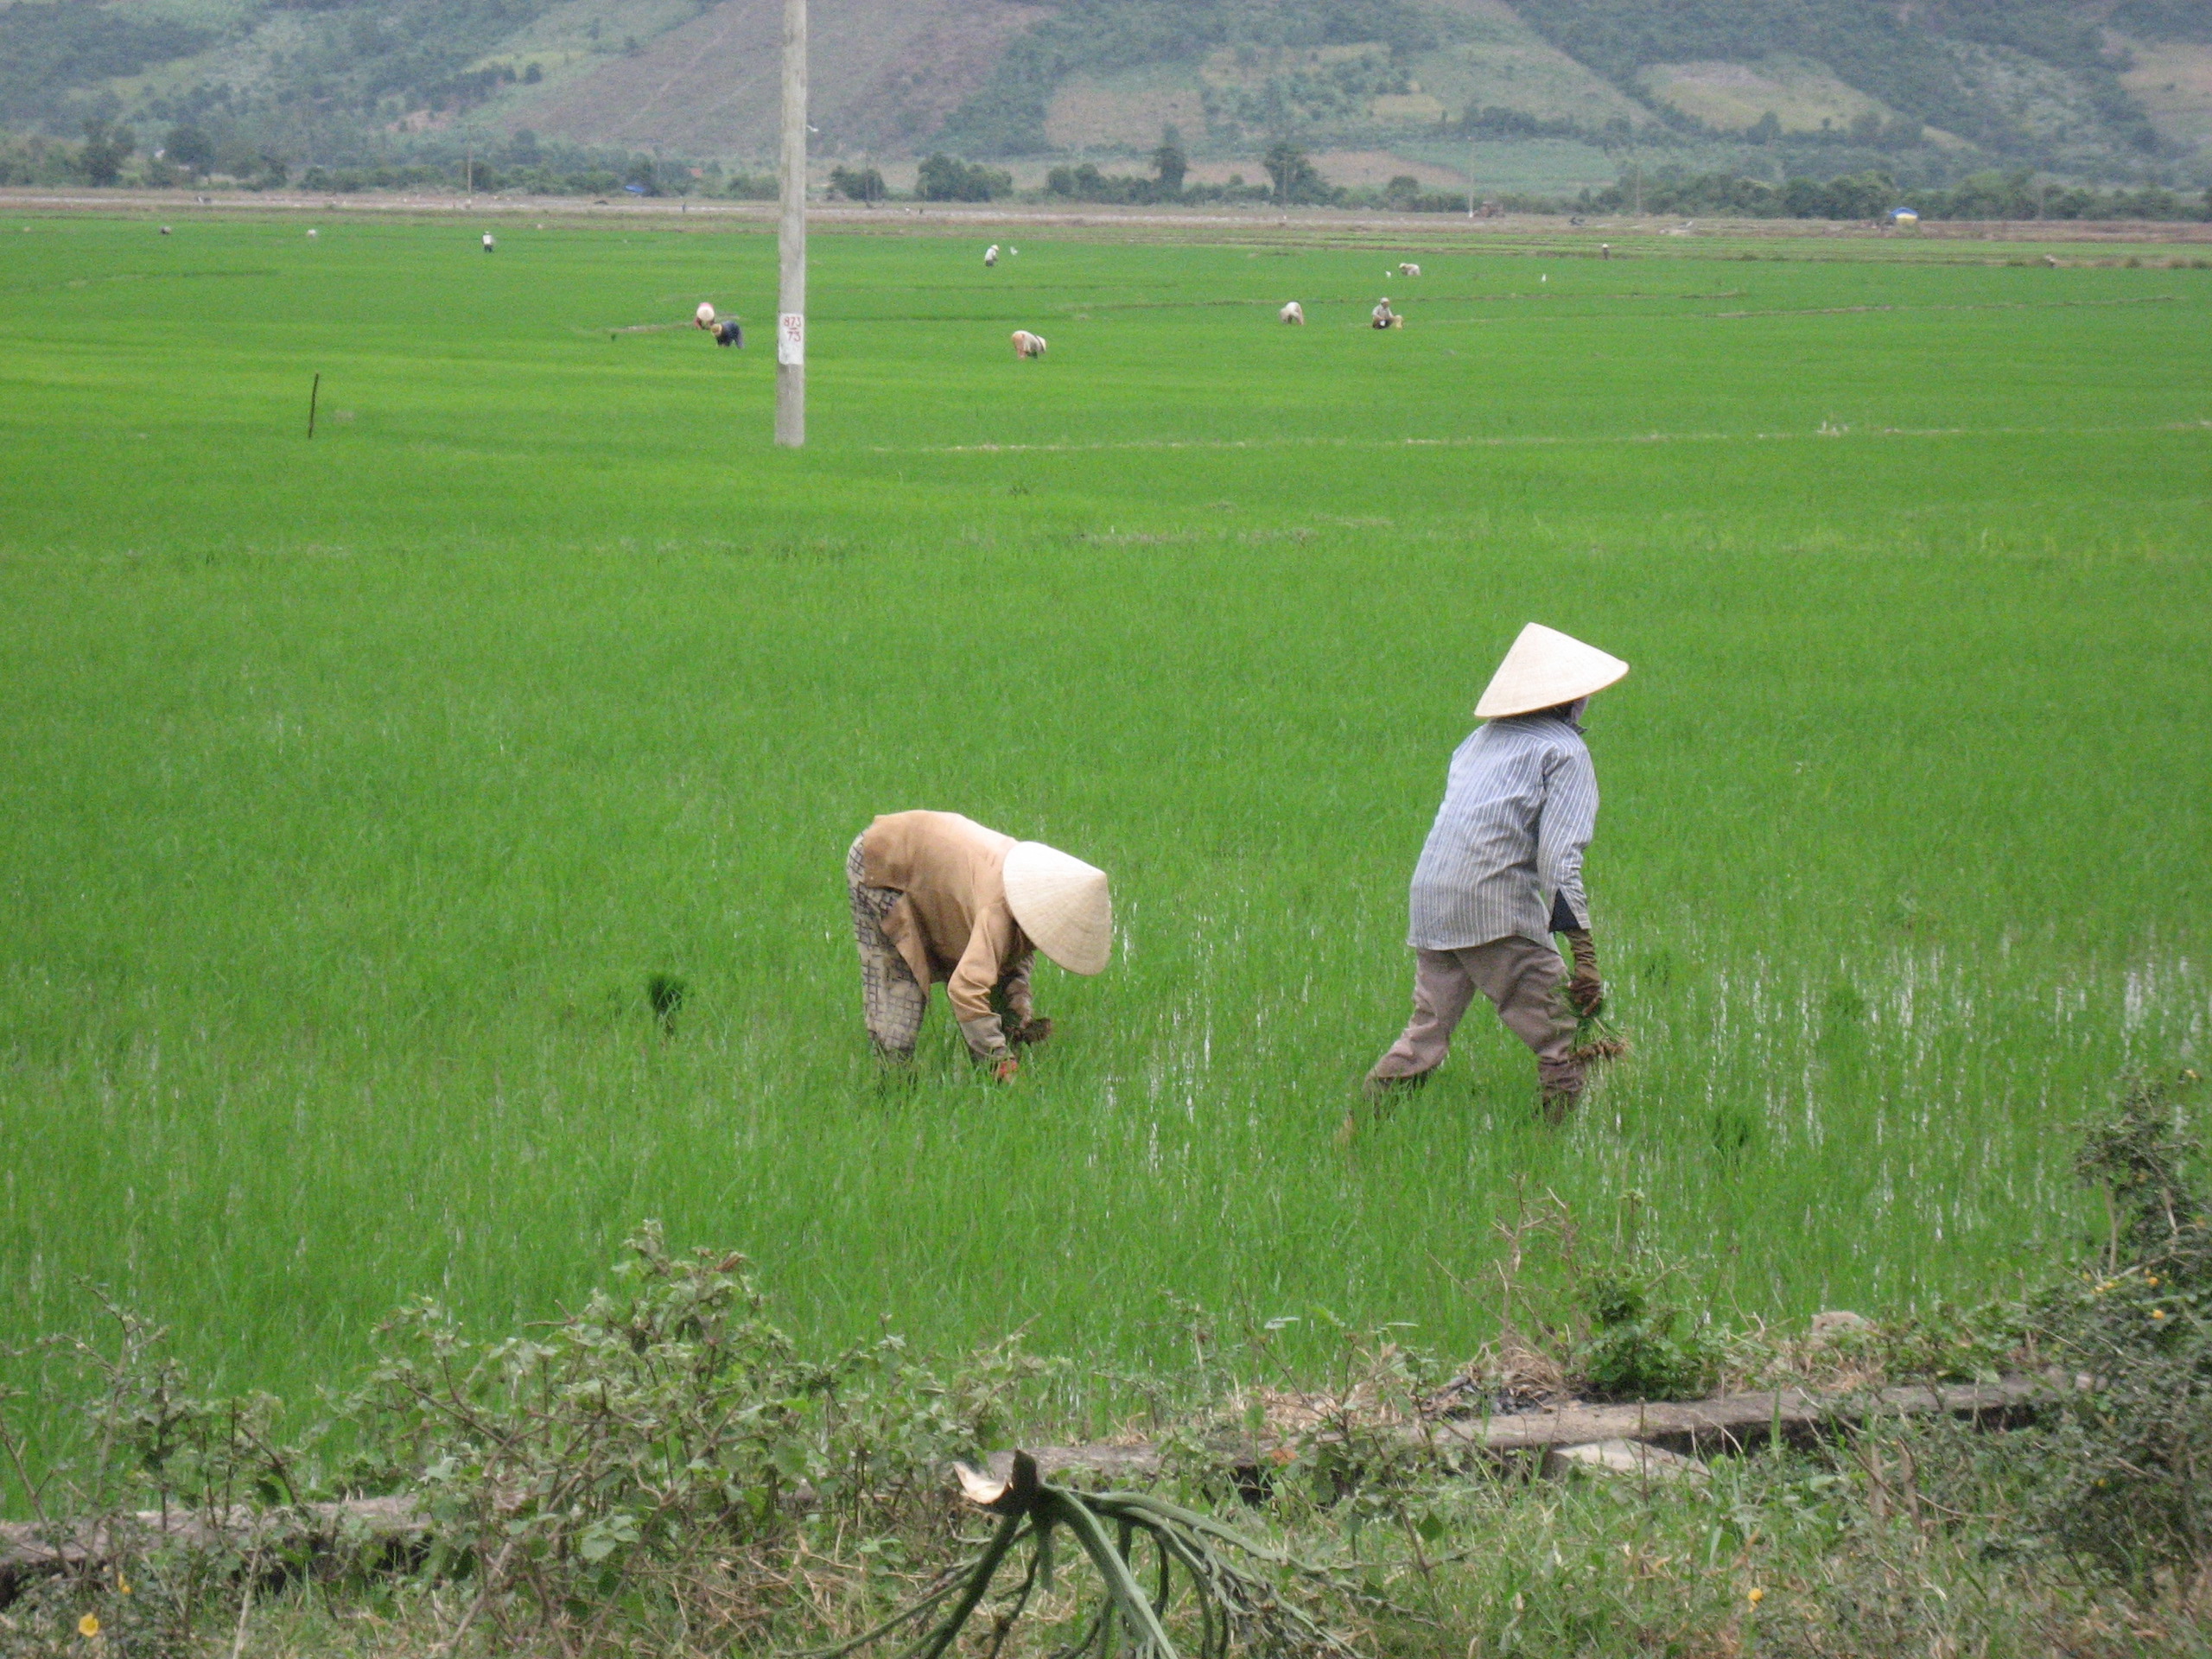 Improved rice cultivation in China is one of the nature-based solutions that can help reduce emissions